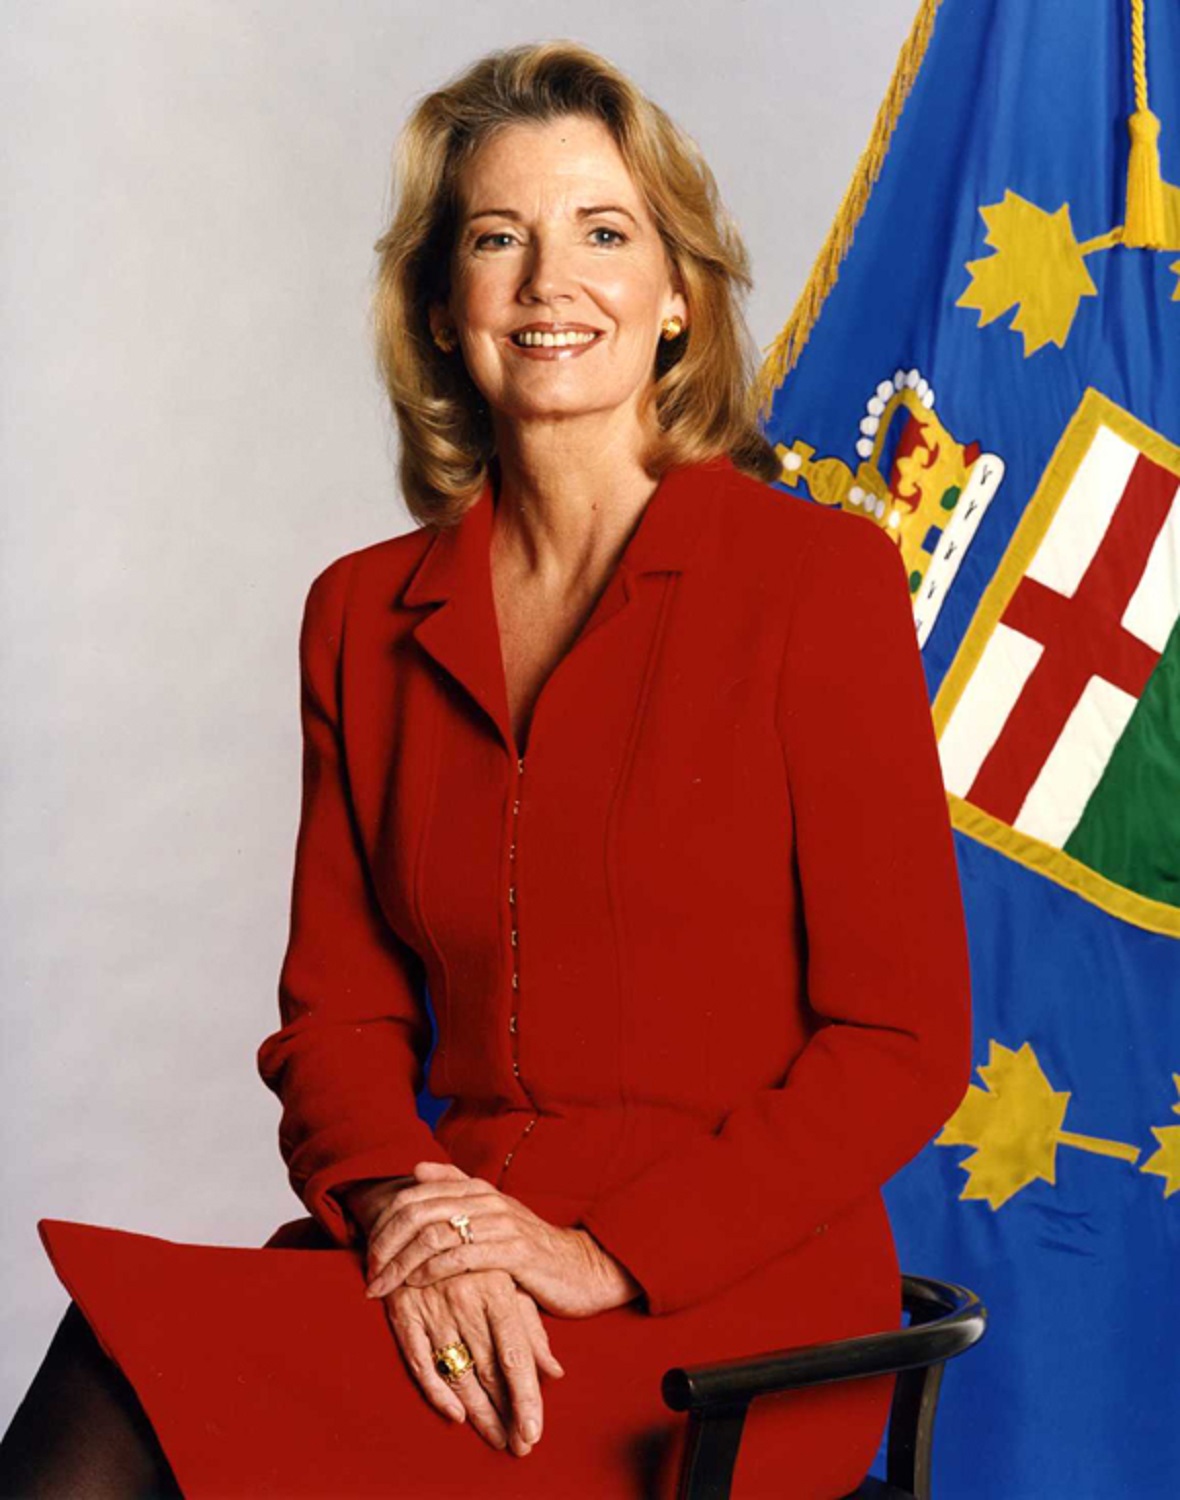 Picture of Lieutenant Governor the Honourable Hilary Weston  courtesy of the office of the Lieutenant Governor of Ontario